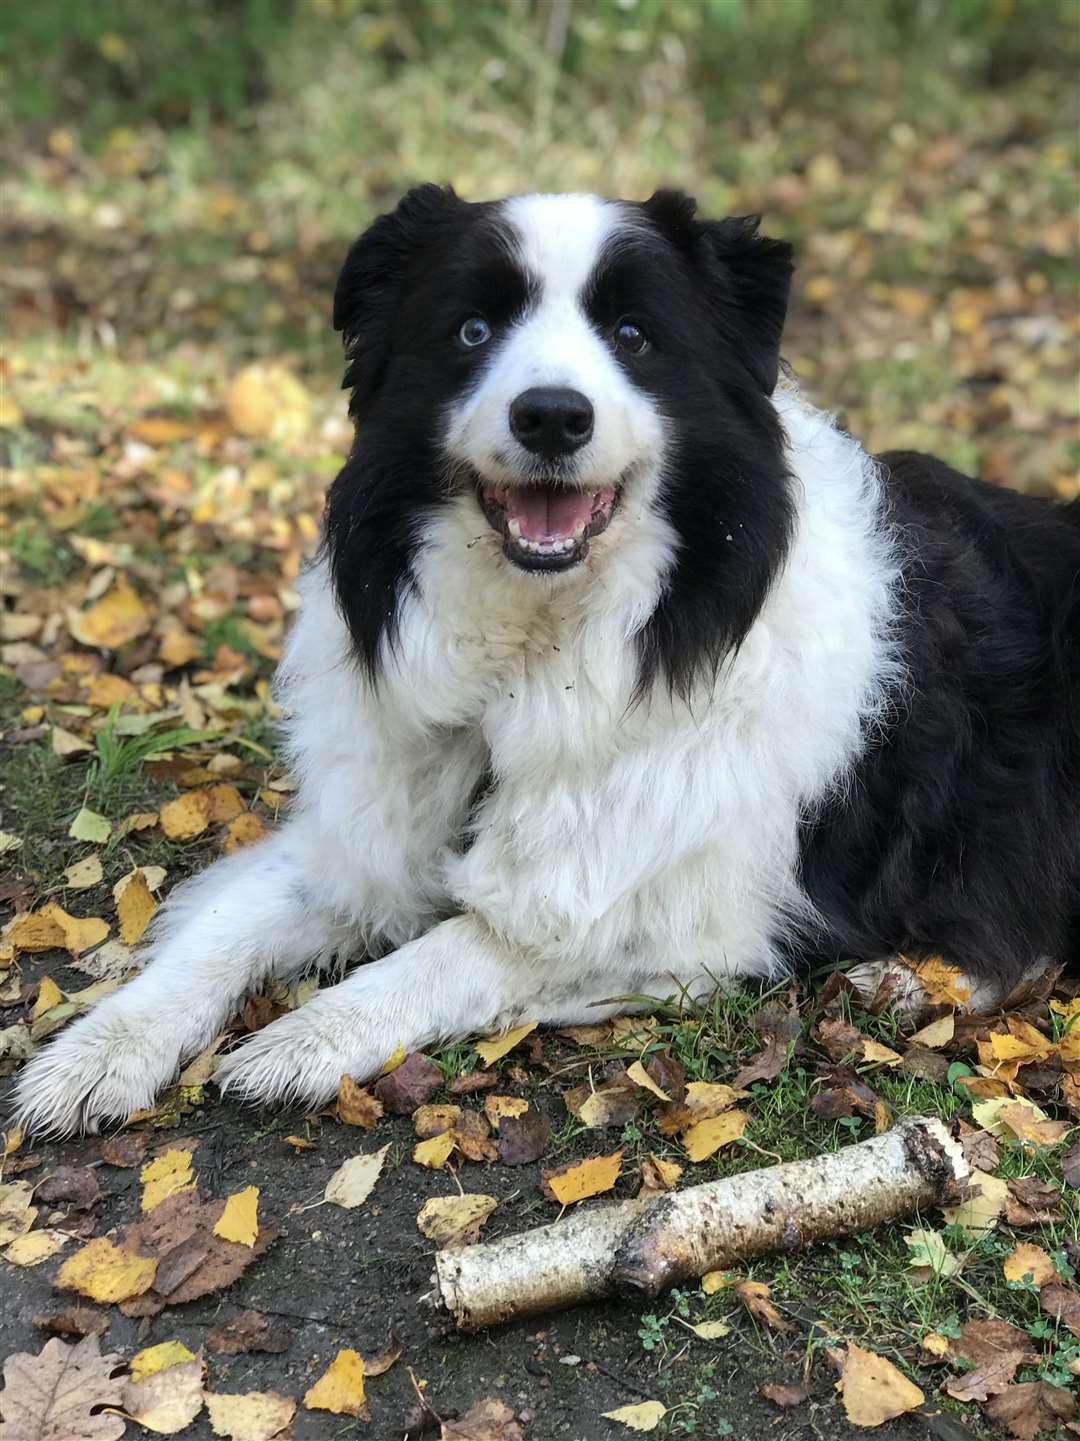 Joe is an 11-year-old Border Collie